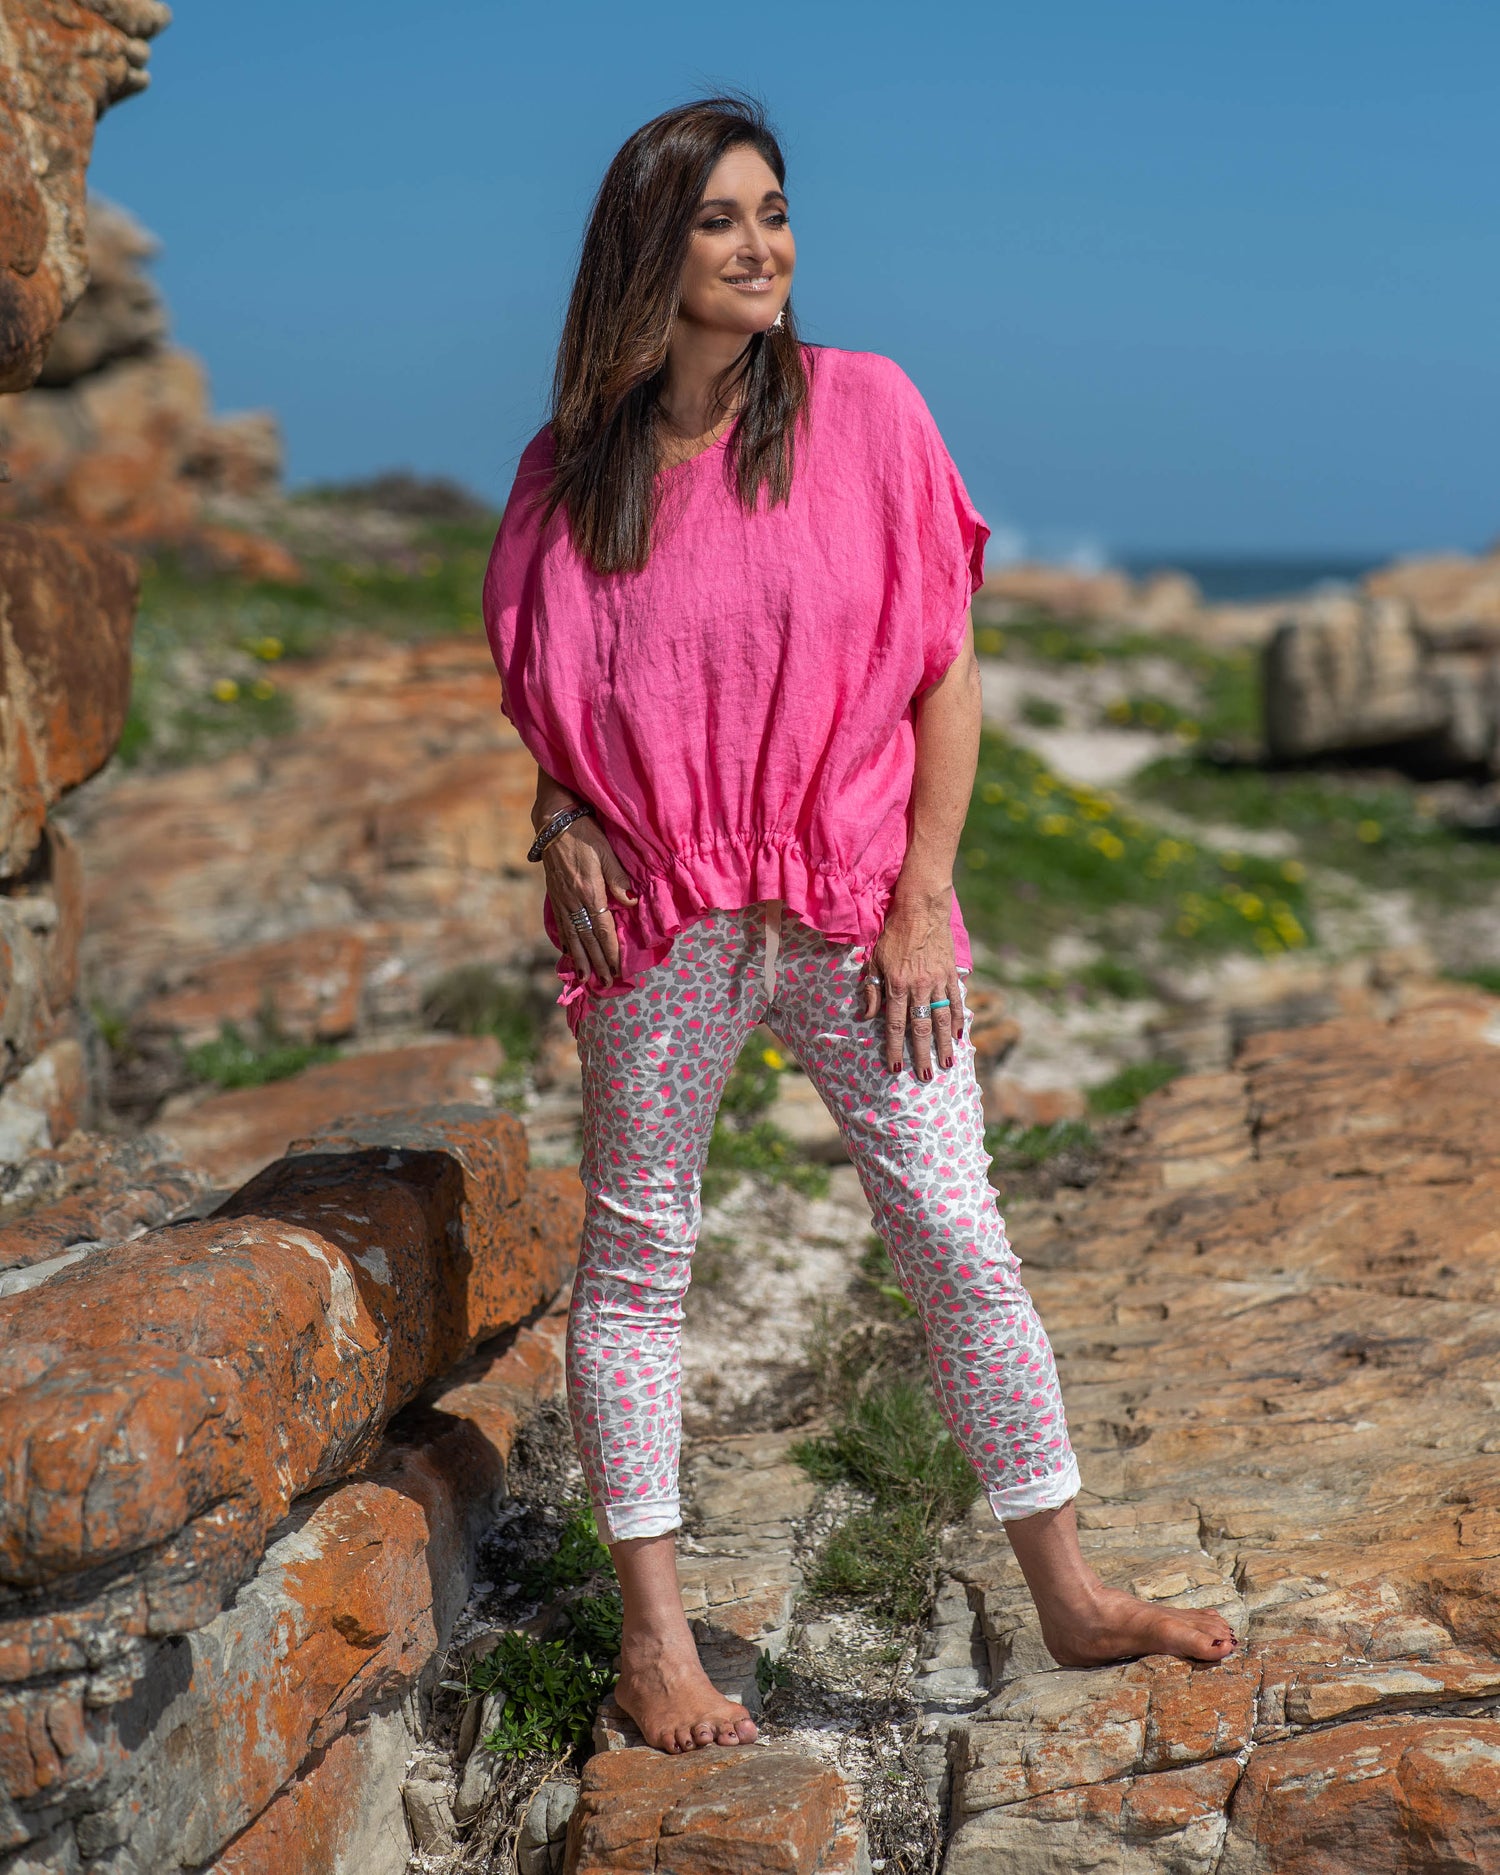 Step into the world of casual chic with this very comfortable, yet stylish linen top. What sets this top apart is its playful frill detailing, adding a touch of whimsy and femininity to your look. The natural, breathable linen fabric keeps you cool and fresh even on the warmest days, making it a must-have addition to your summer wardrobe